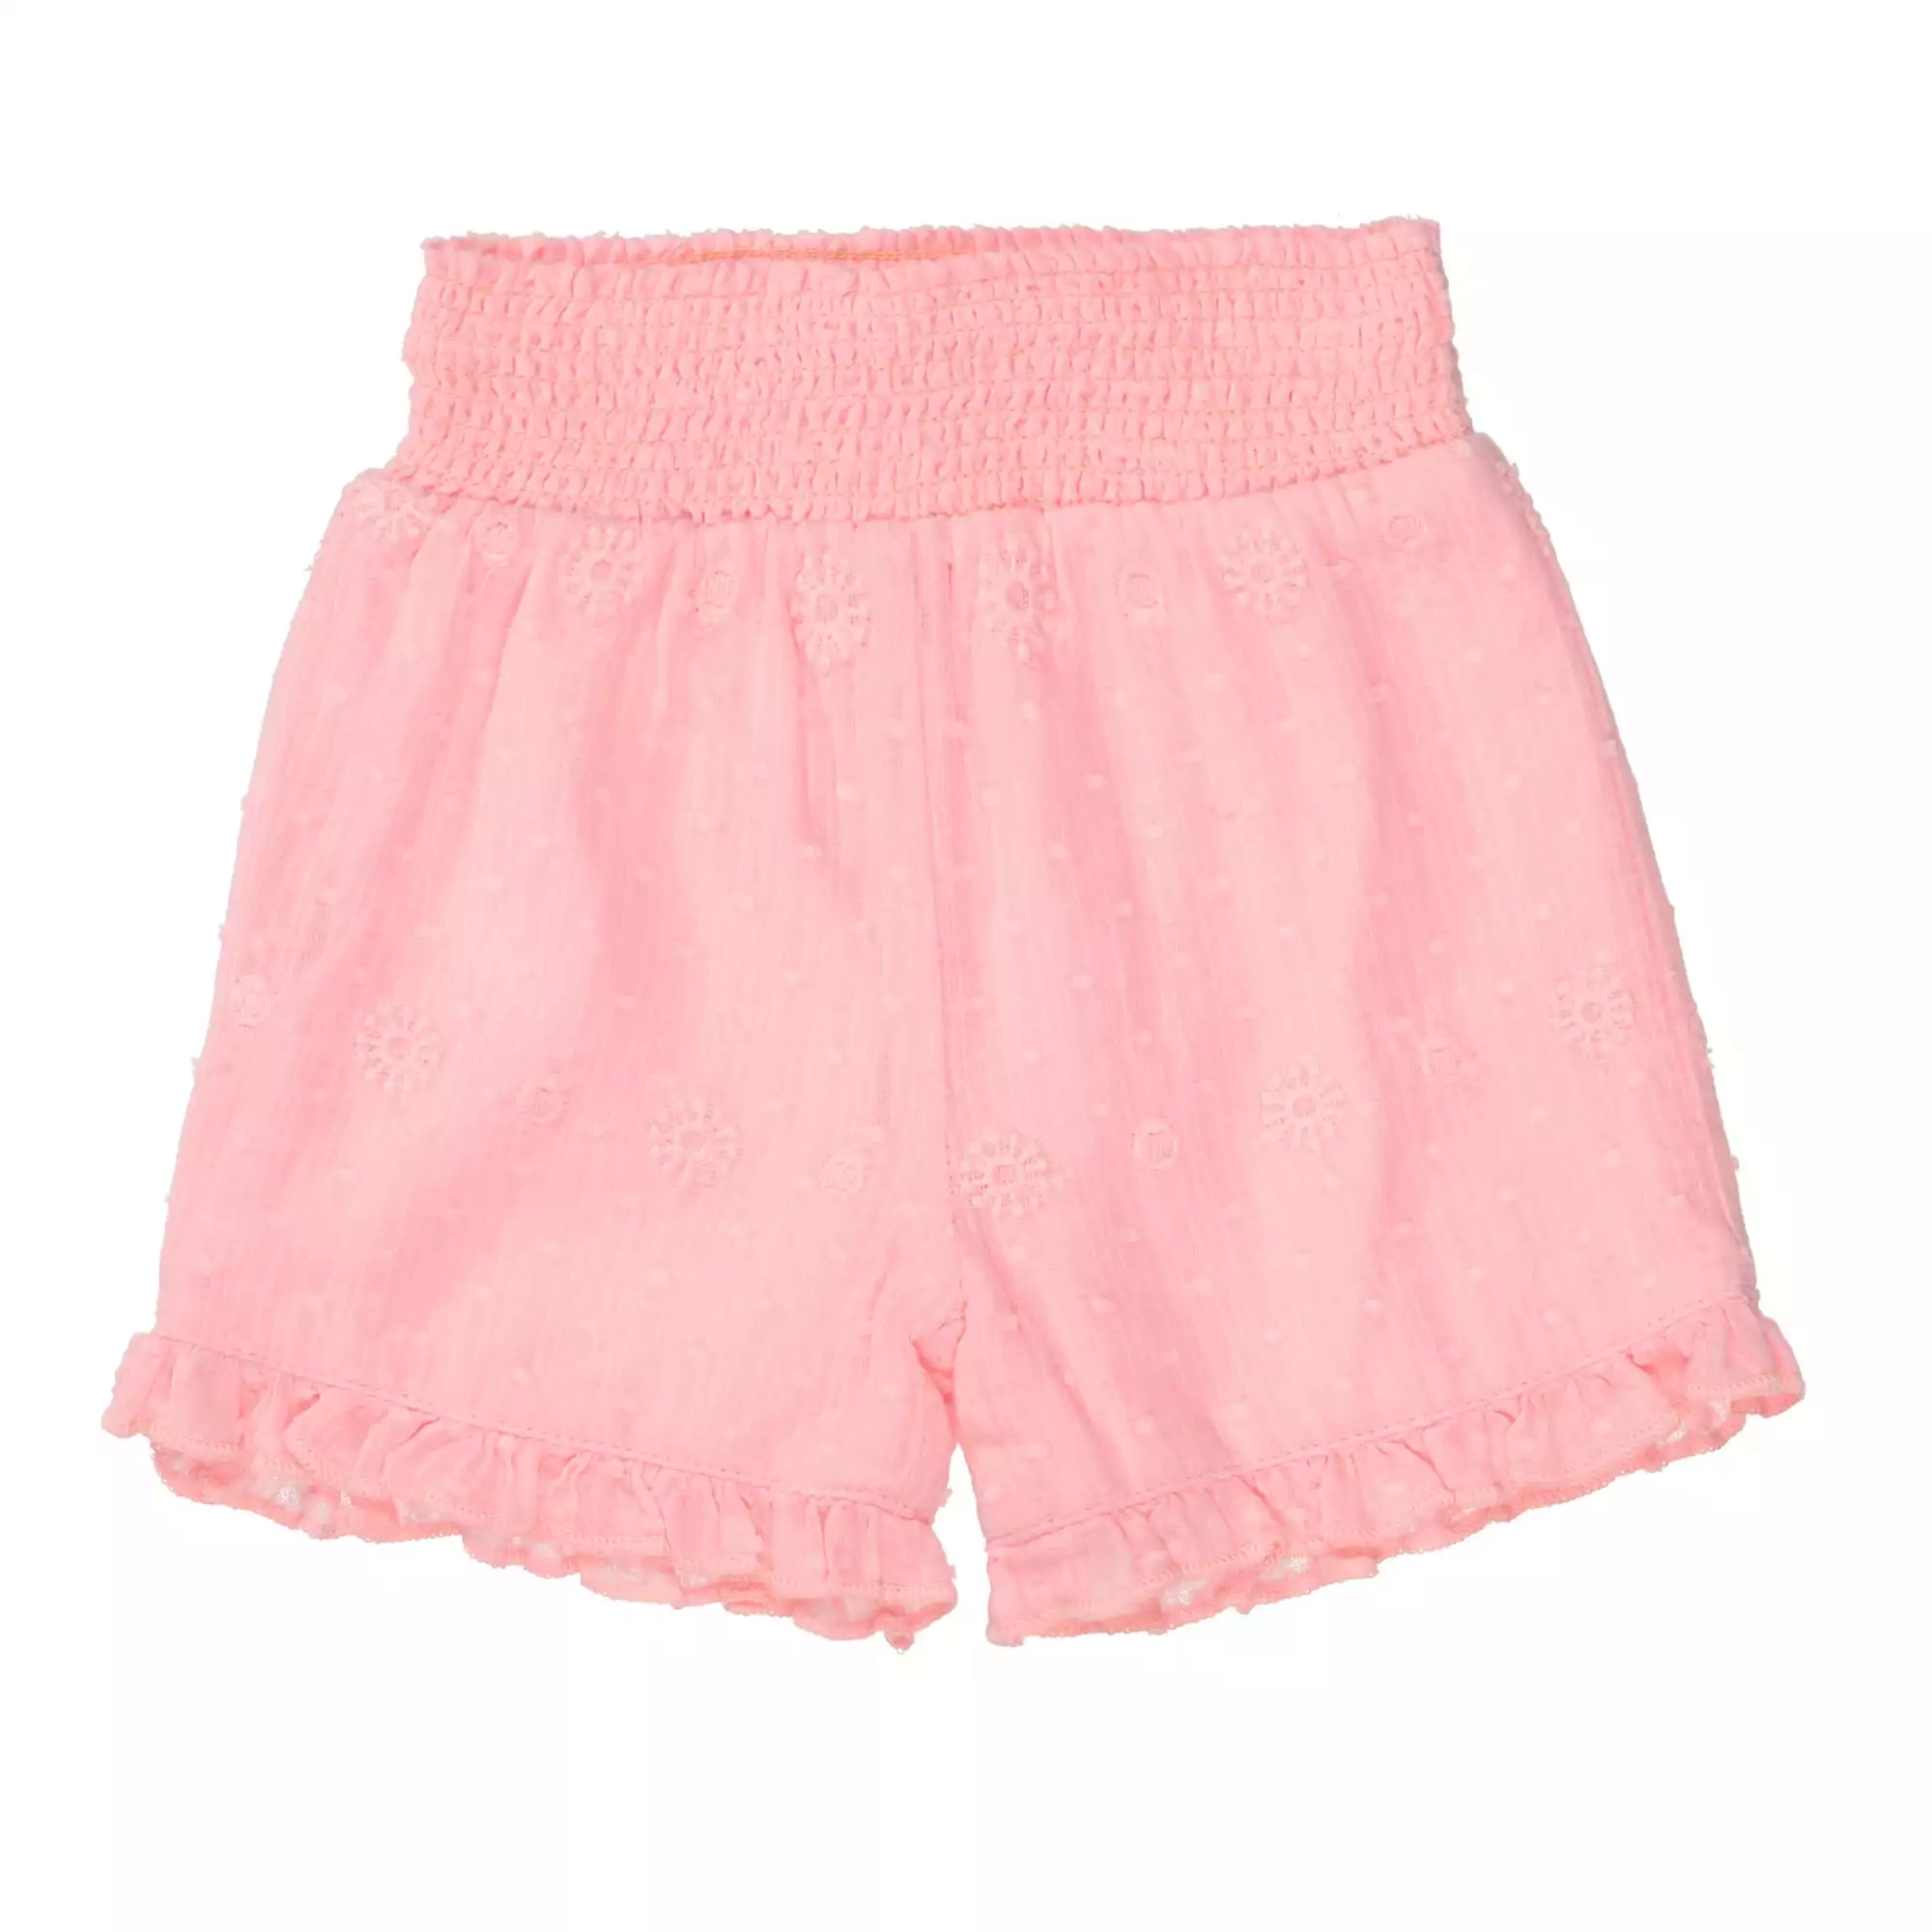 Webshorts STACCATO Pink Rosa M2000582153703 1